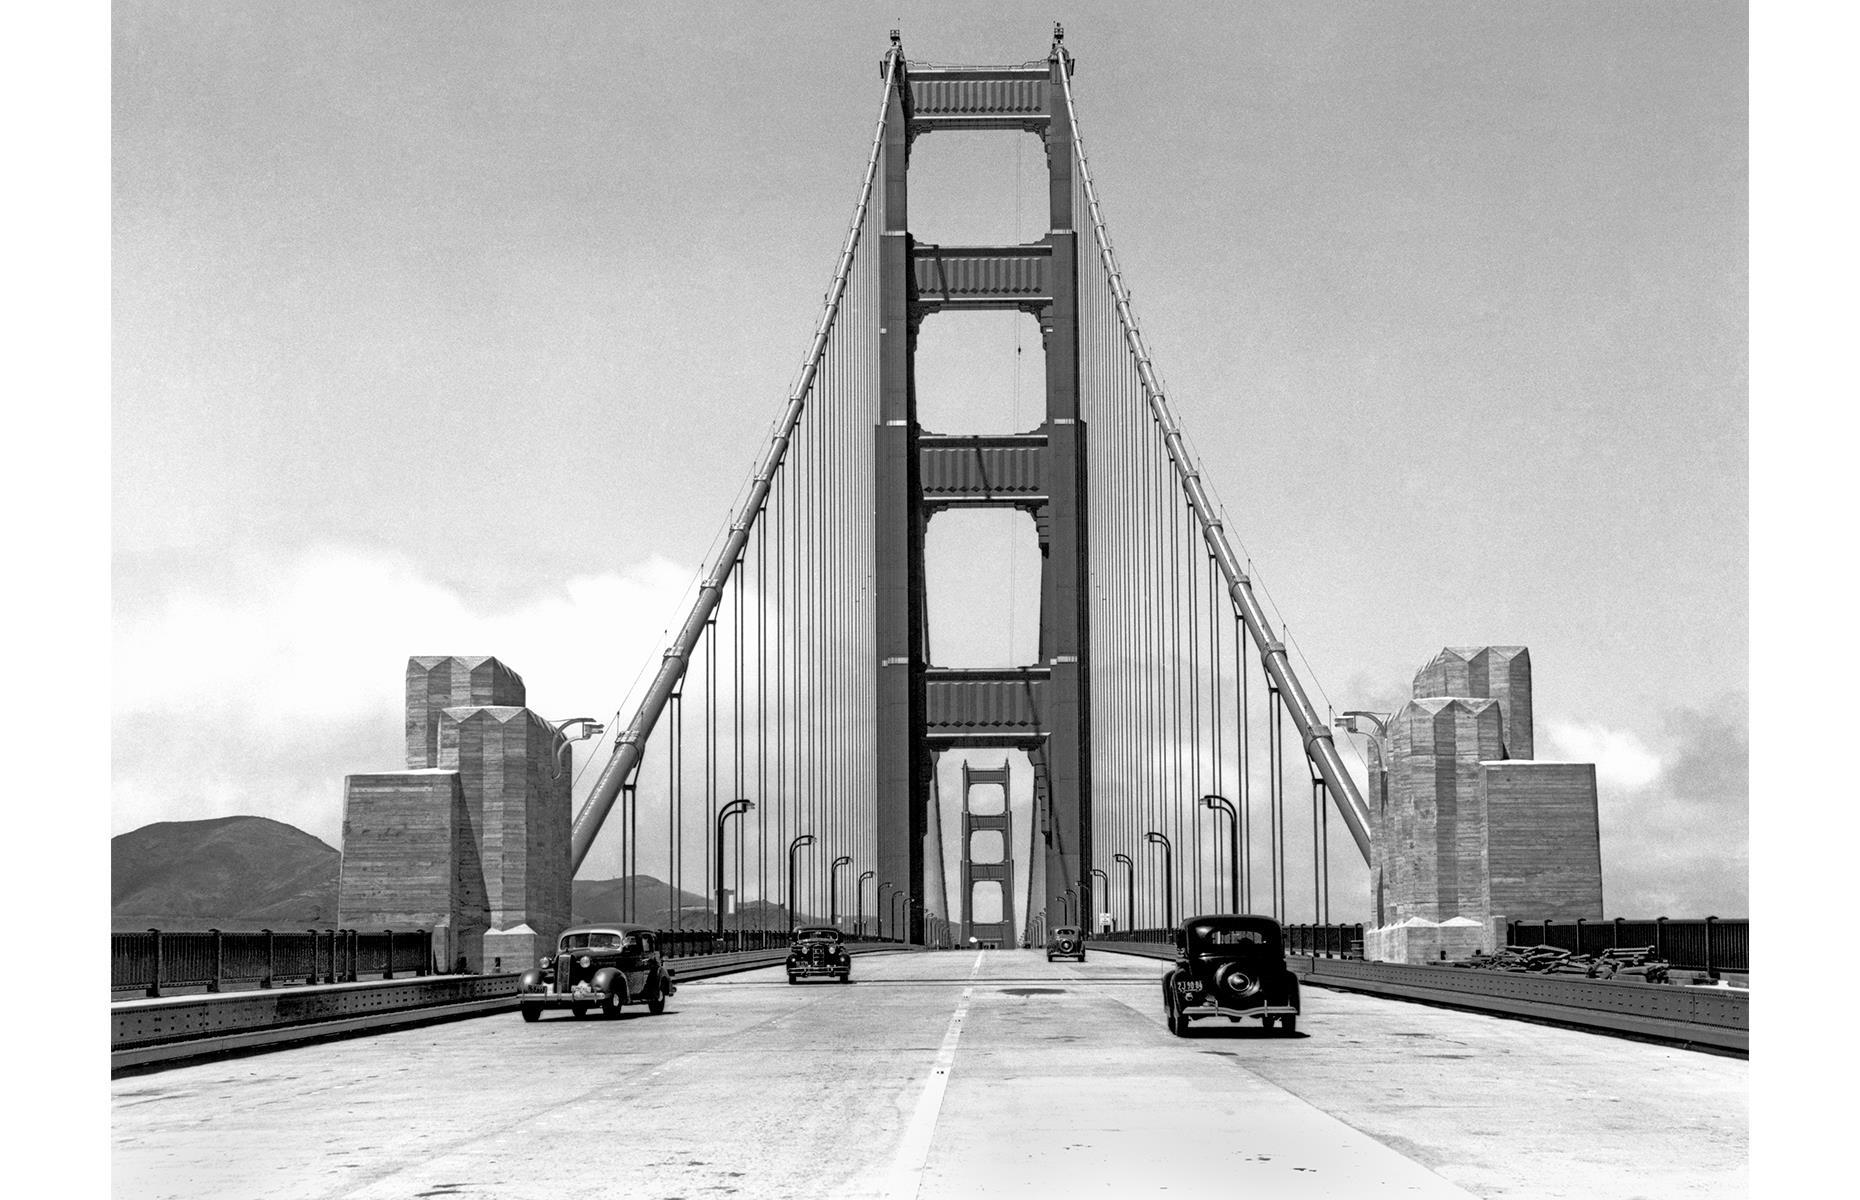 <p>The red-orange Golden Gate Bridge has spanned its namesake strait since 1937, and at the time it was the longest and tallest suspension bridge in the world. Pictured here on 24 May 1937, a few days before its official opening date, a small number of journalists were allowed to cross the bridge. Today, the bridge is crossed by 100,000 vehicles per day. <a href="https://www.loveexploring.com/gallerylist/71687/the-most-impressive-bridge-in-every-us-state-and-dc">These are the most impressive bridges in every state and DC</a>.</p>